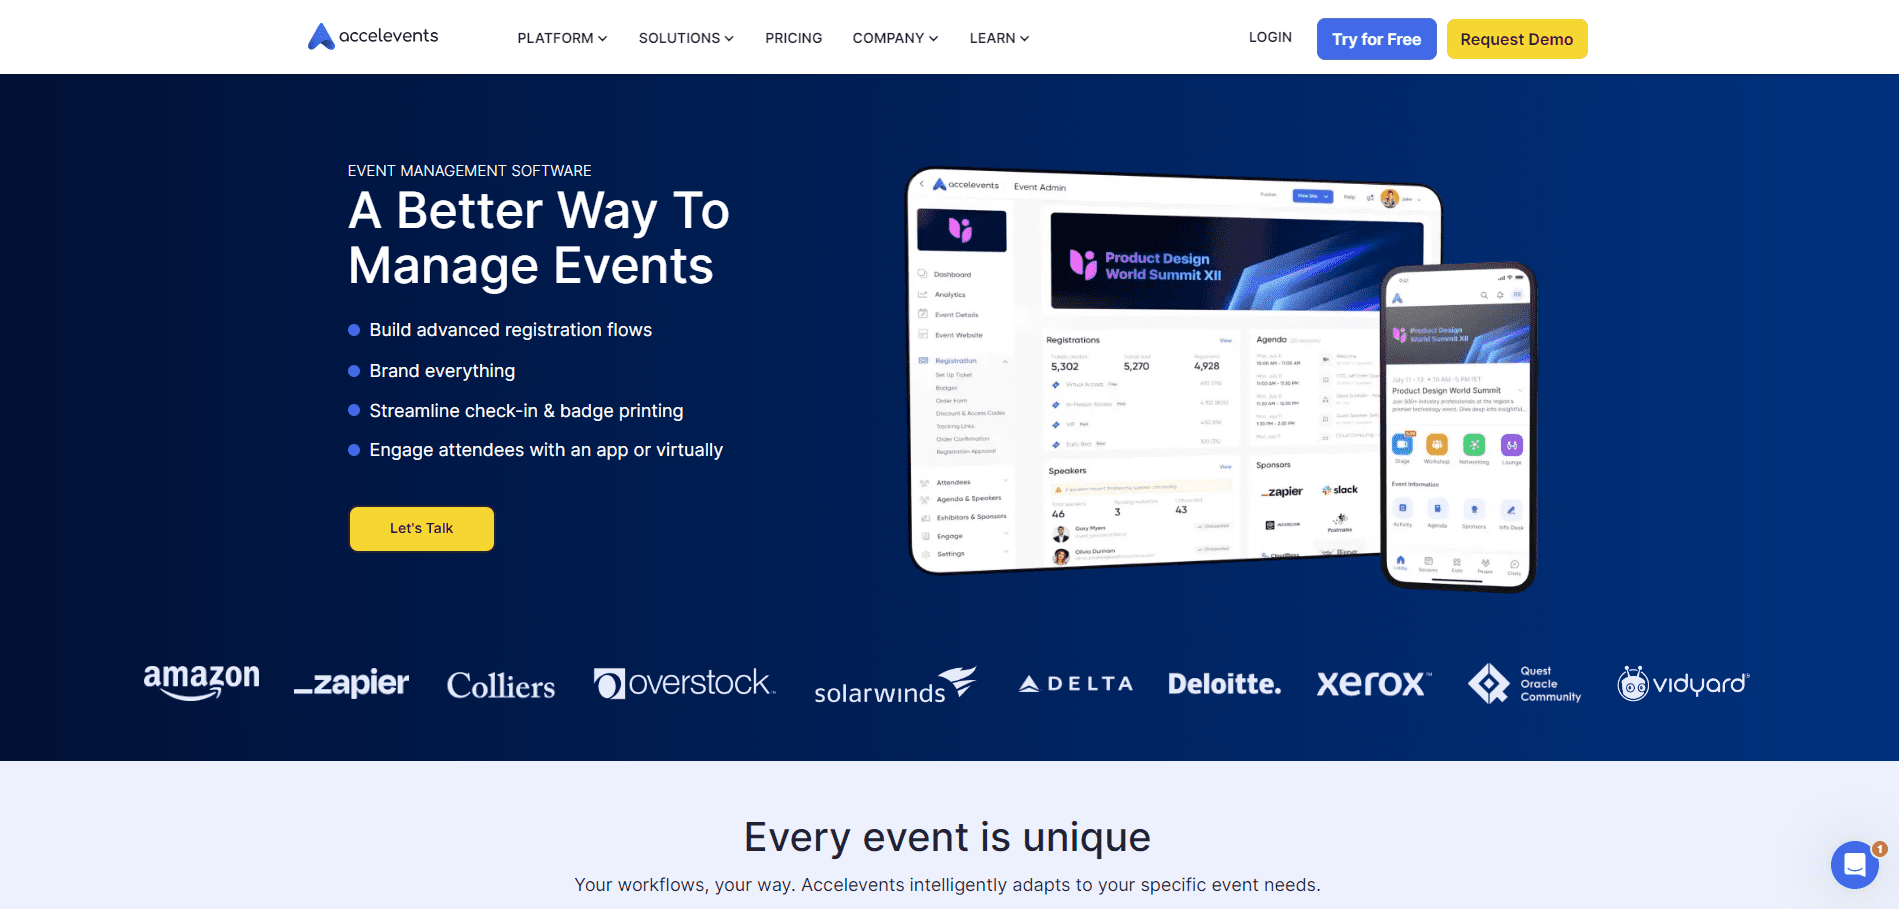 Accelevents' homepage